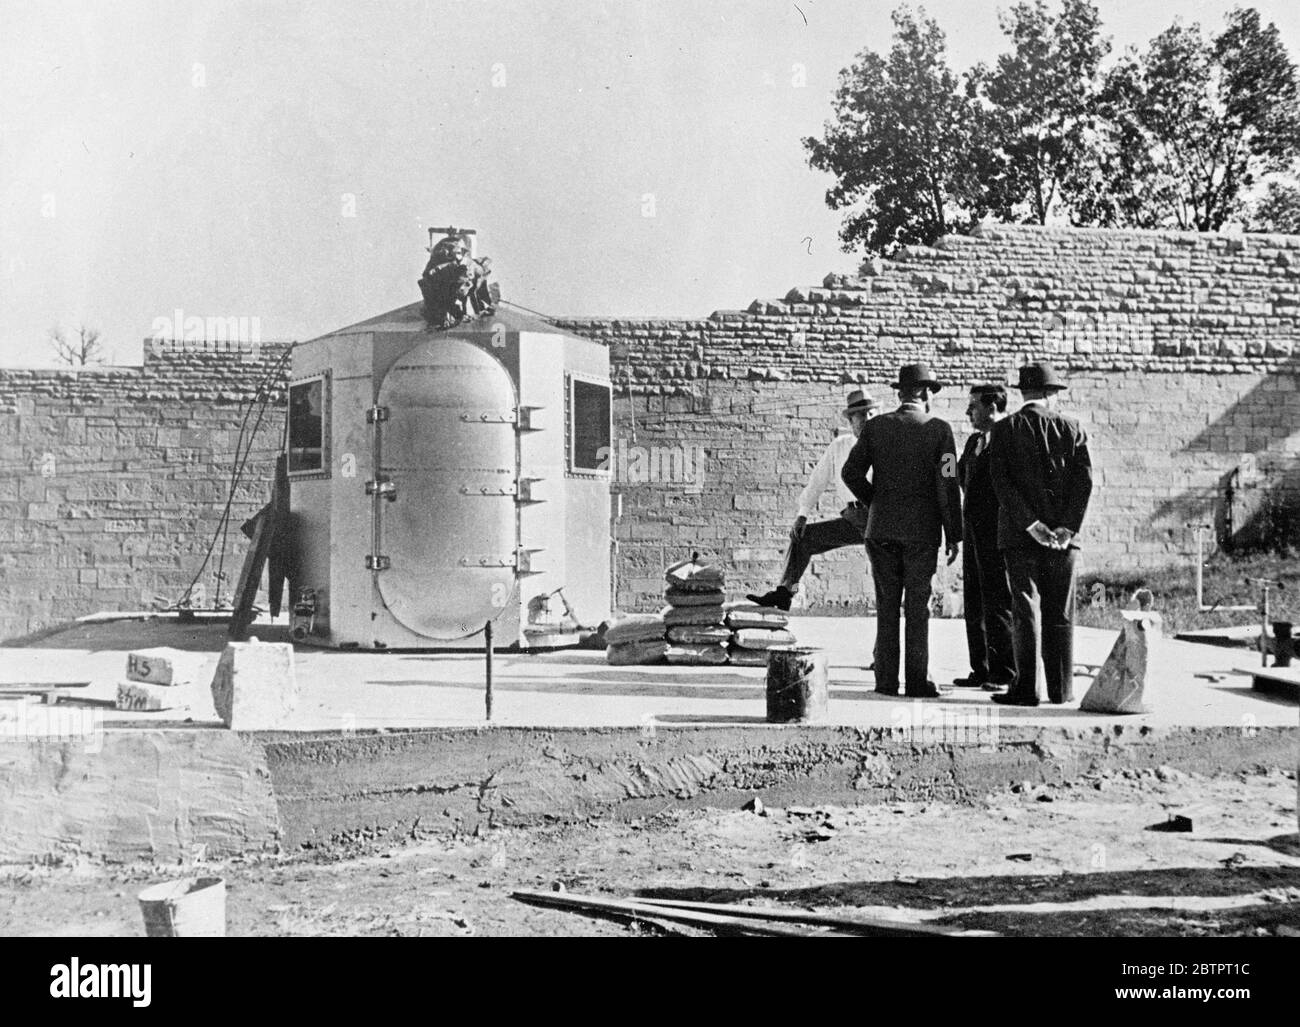 America's newest lethal chamber. Executions by gas instead of hanging. A new steel lethal chamber has been erected in the yard of the Missouri State Penitentiary at Jefferson City for executions under the new law, substituting lethal gas for hanging. The chamber has seats for two. When a lever is operated, cyanide pellets dropped into dire looted so feared acid to generate a deadly gas. From the outside, the appearance of the gas chamber resembles a submarine chamber. Photo shows, the new steel lethal chamber, resembling a submarine chamber, in the yard of the Missouri State Penitentiary at Je Stock Photo